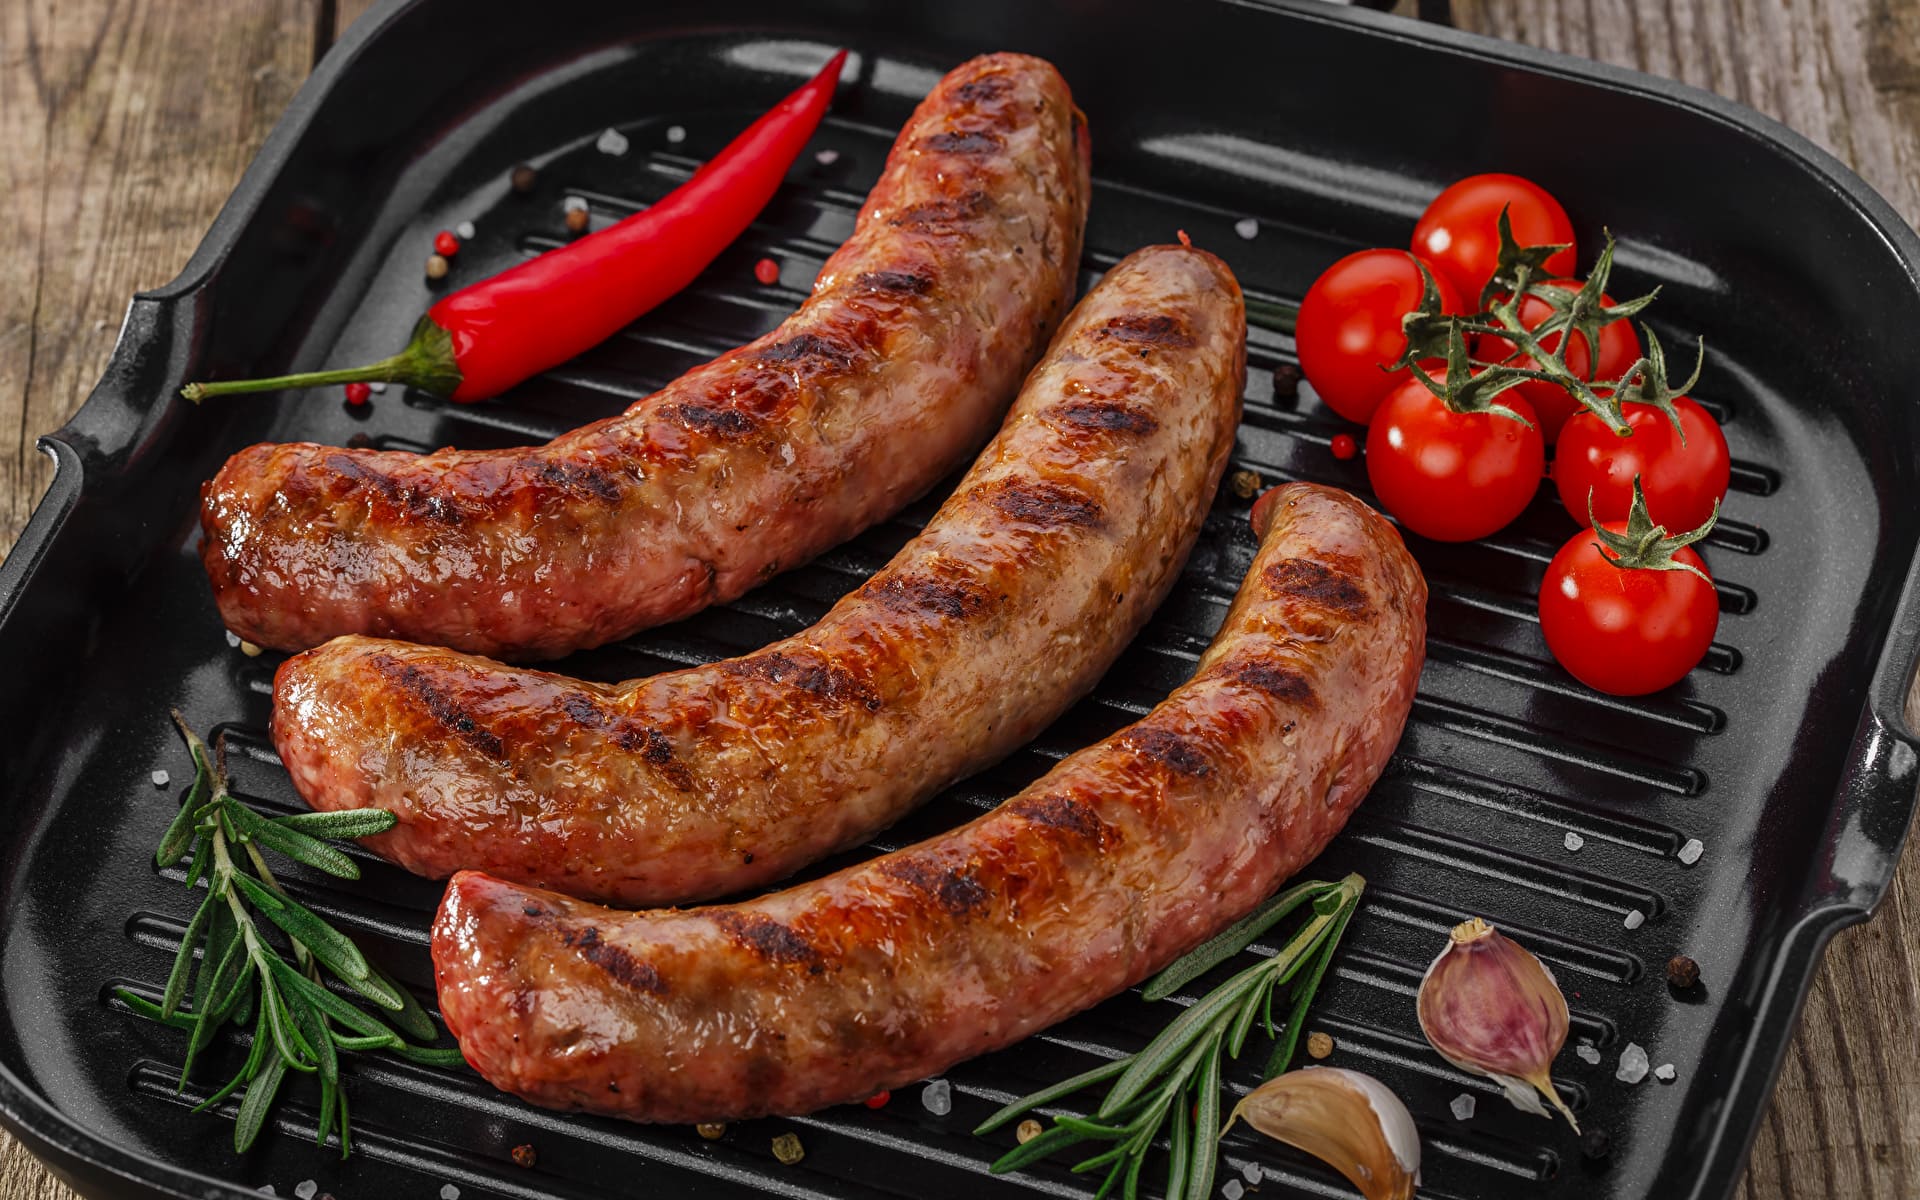 Meat products Sausage 469794 1920x1200